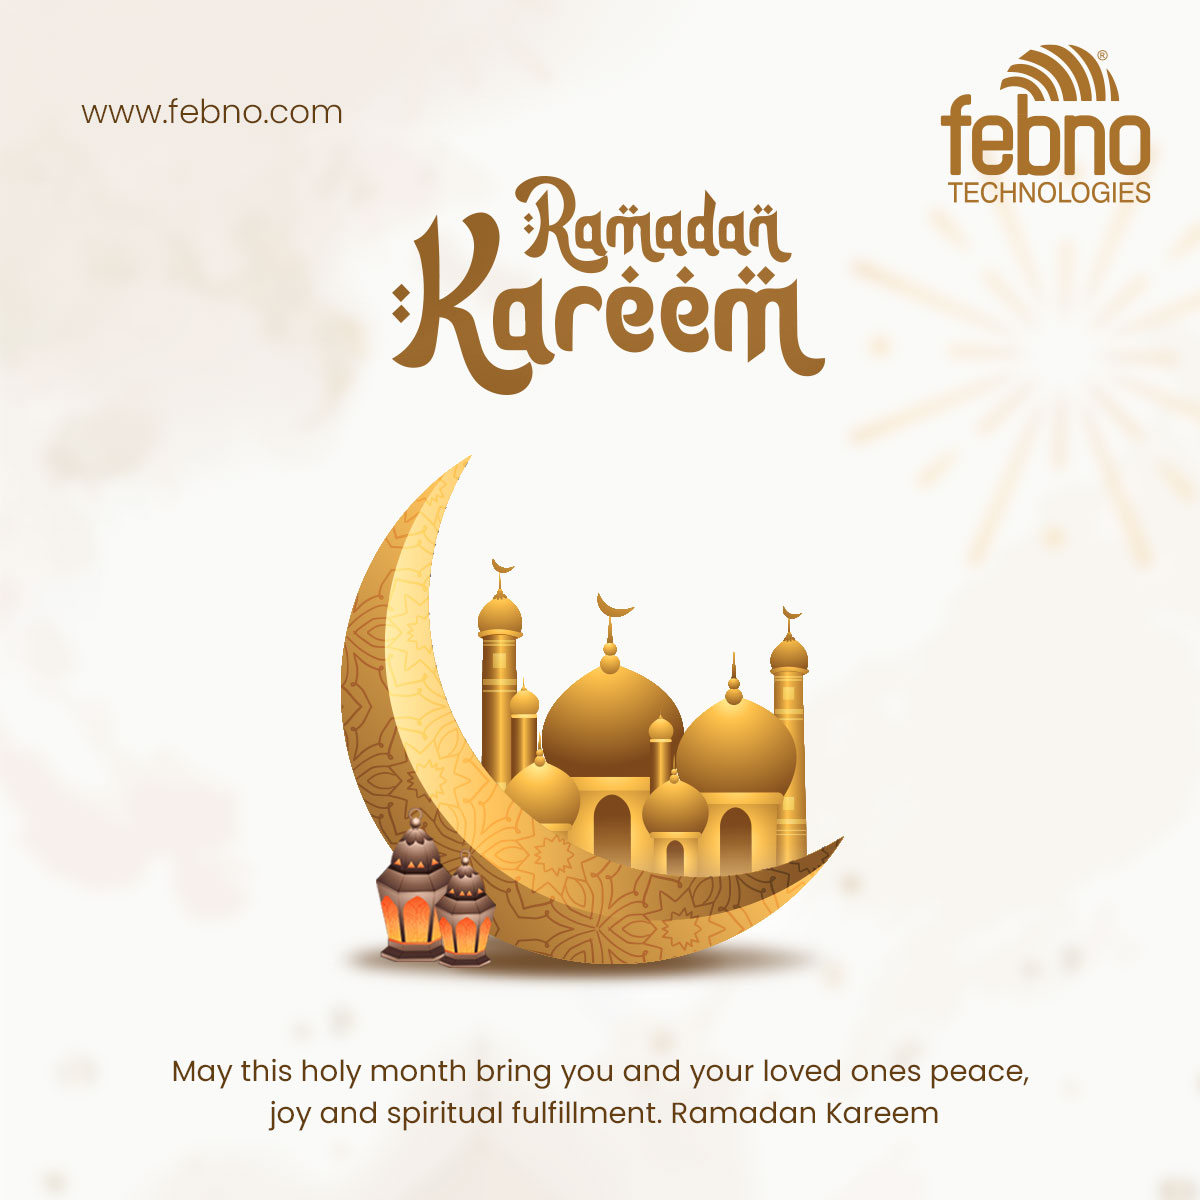 Wishing you and your loved ones a blessed Ramadan!

#febnotechnologies #ramadankareem